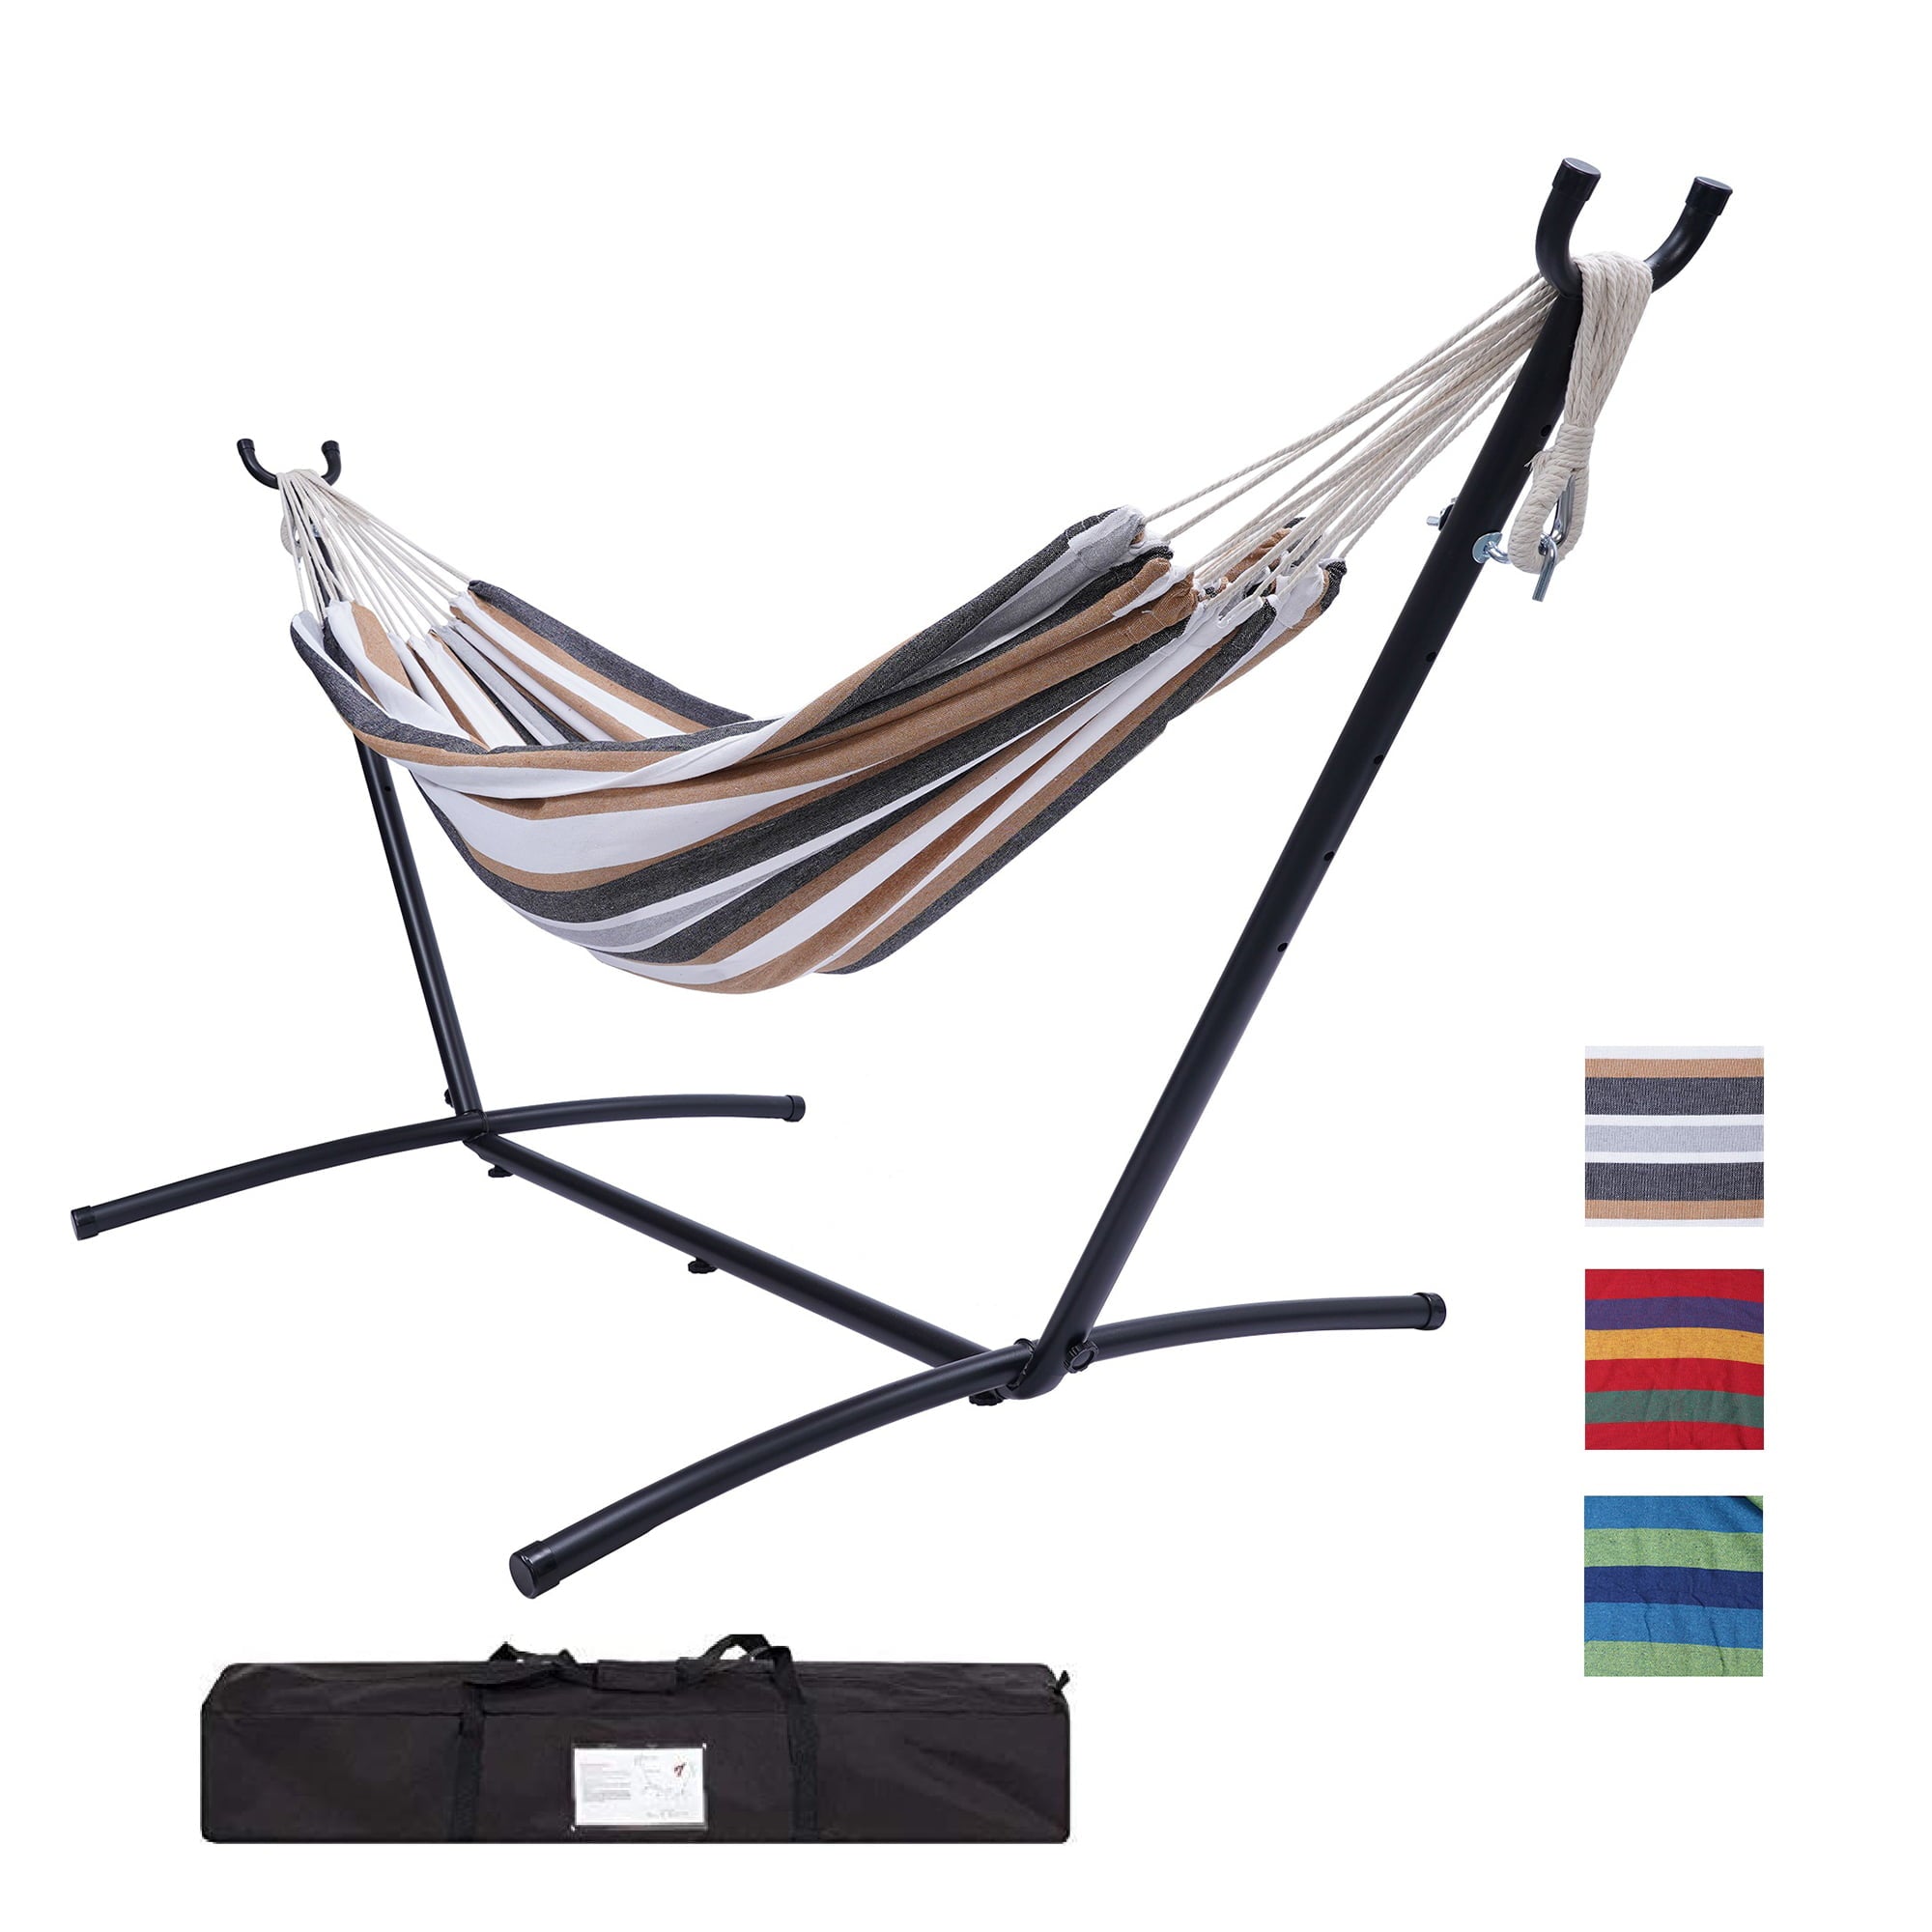 Outdoor Patio Yard Beach Double Hammock Or Indoor with Carrying Case, Portable Hammock with Stand, Heavy Duty Steel Frame, Brown/Grey Striped